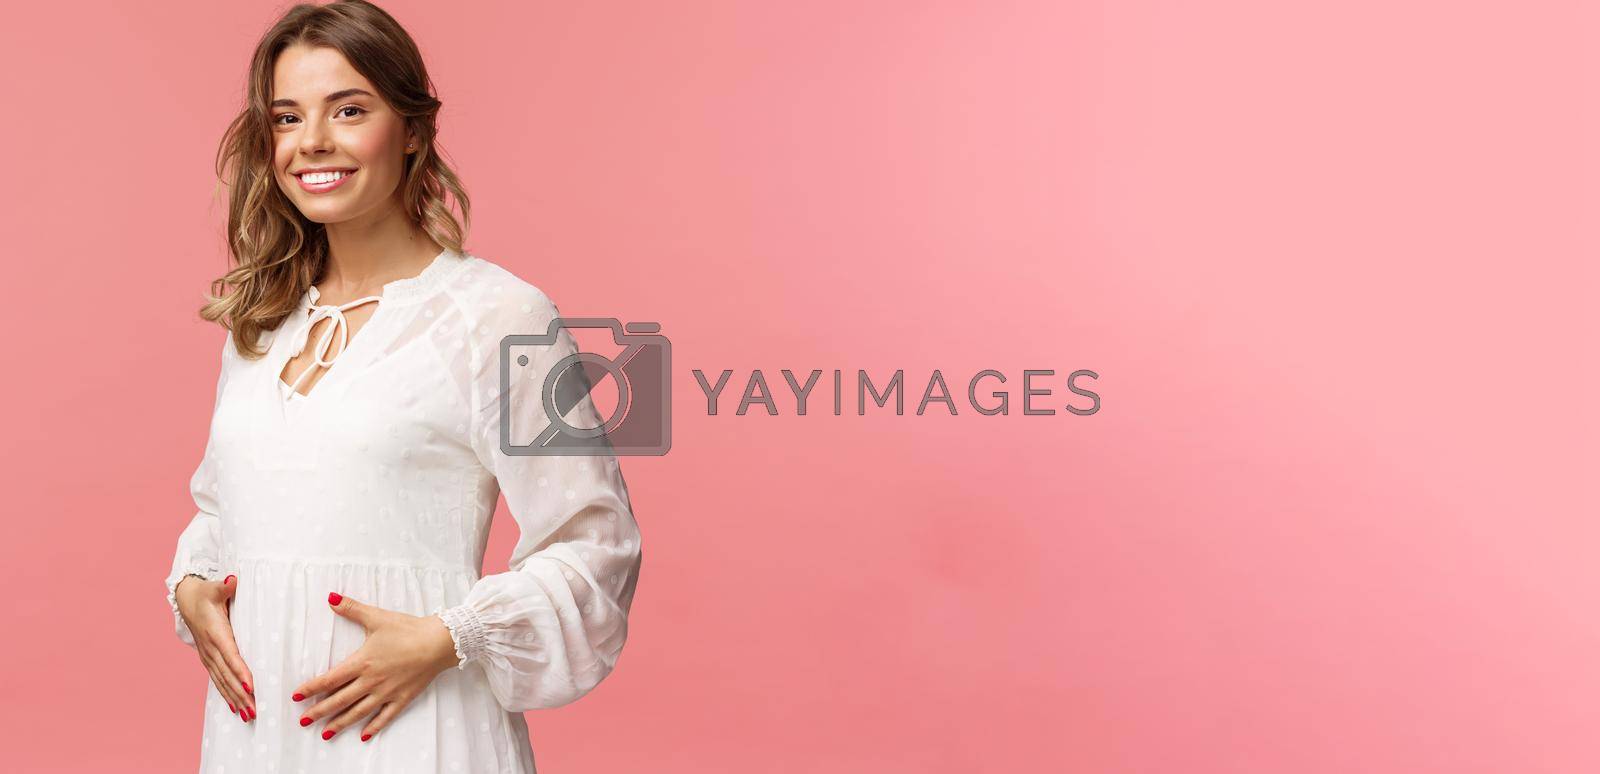 Maternity, women and beauty concept. Tender, cute smiling blond woman in white dress feeling happiness and love, touching belly as expecting child, being pregnant, pink background.